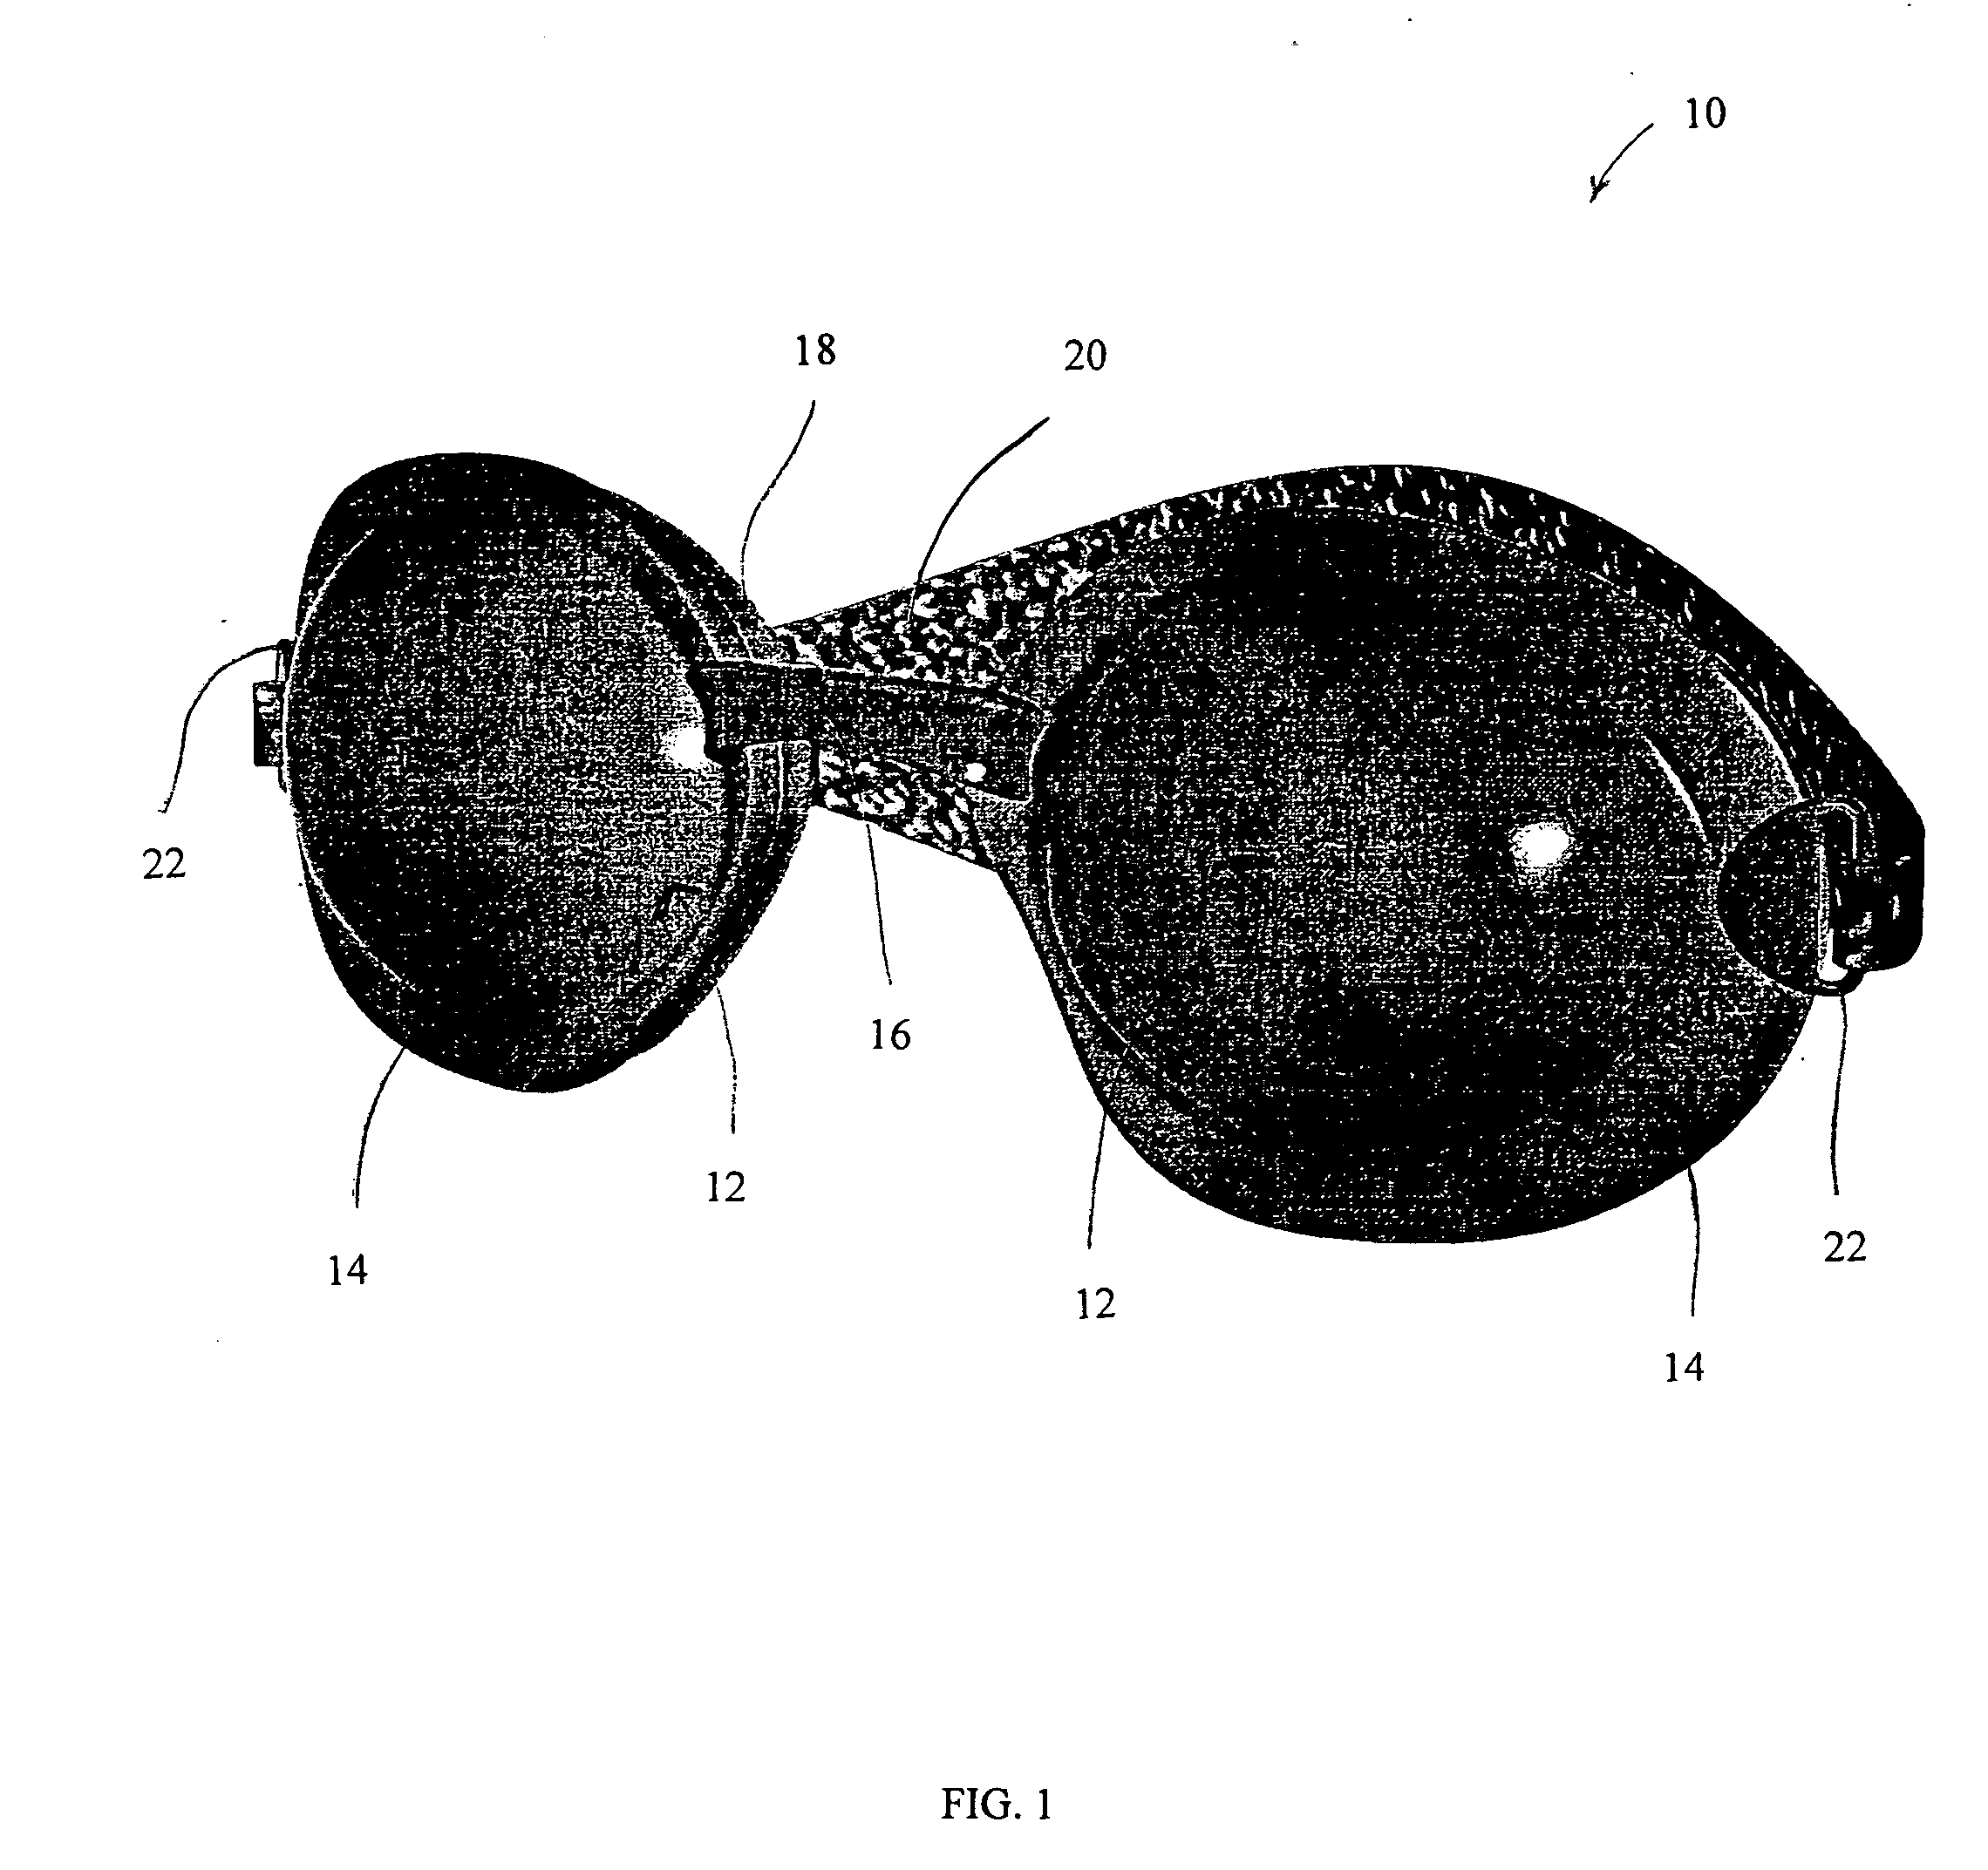 Apparatus, system and method for treating dry eye conditions and promoting healthy eyes